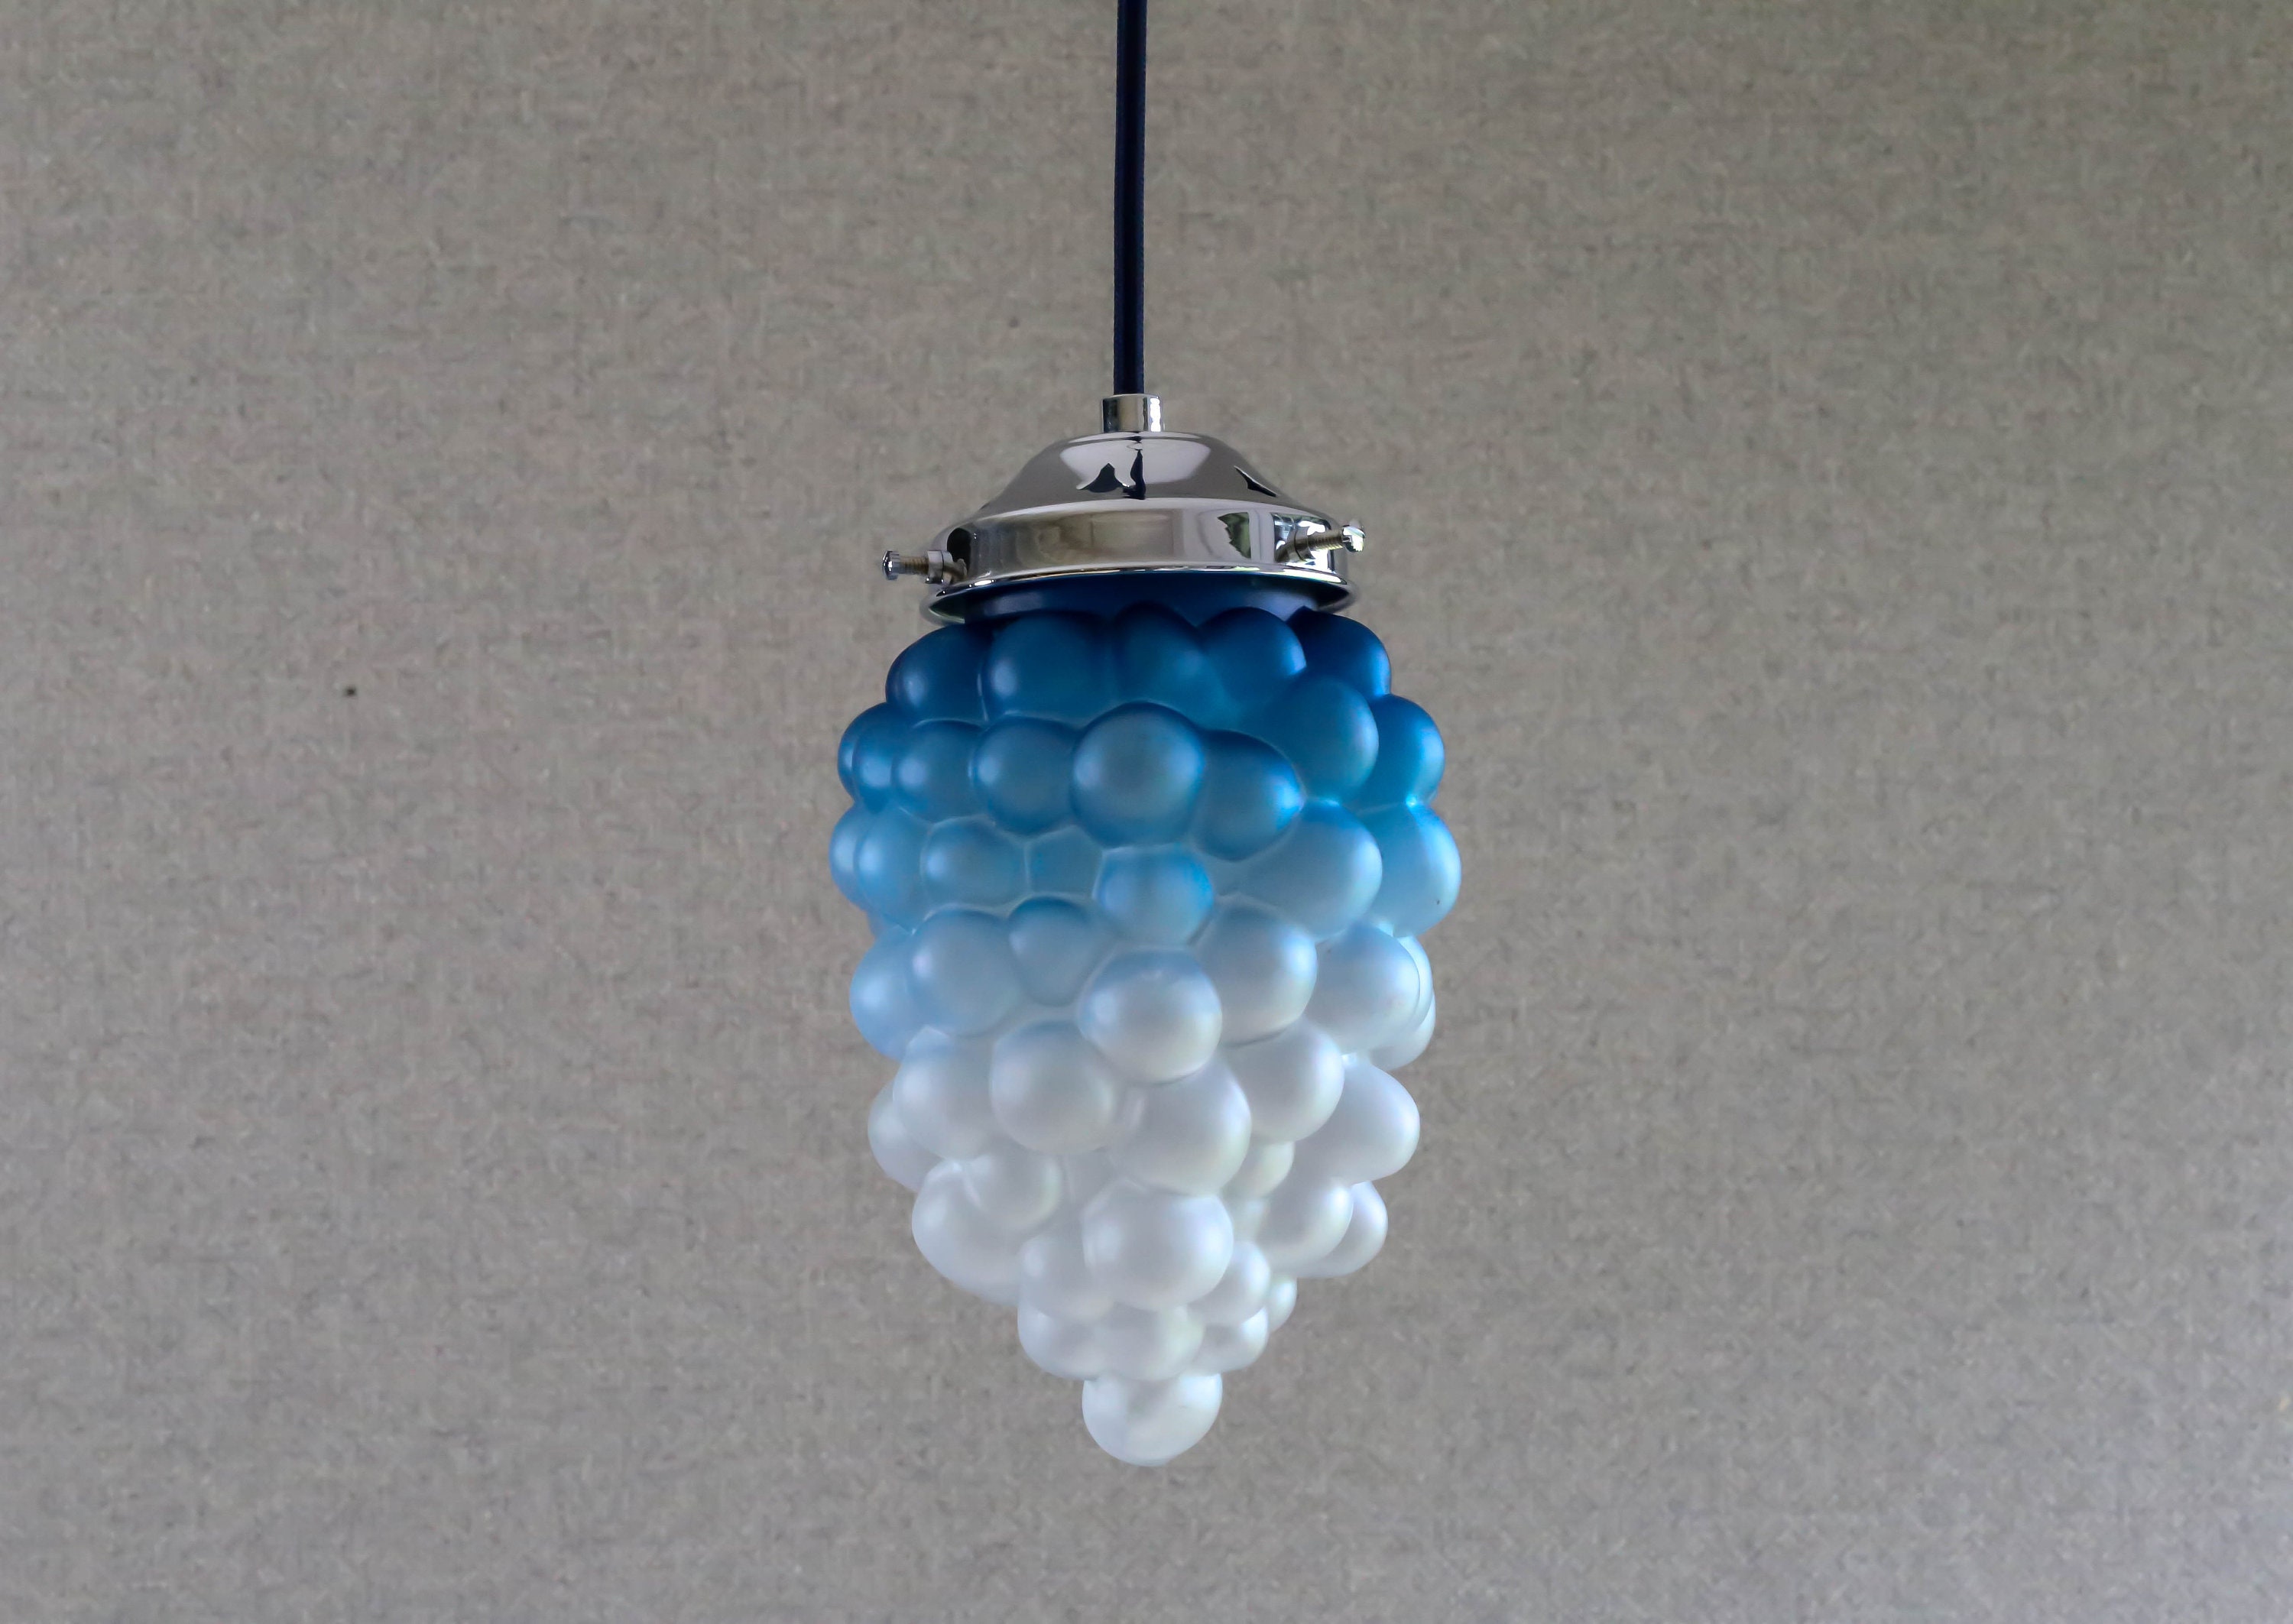 Antique French Ceiling Light in Translucent Blue & White Glass, Pendant Grape Lamp - Early Century R